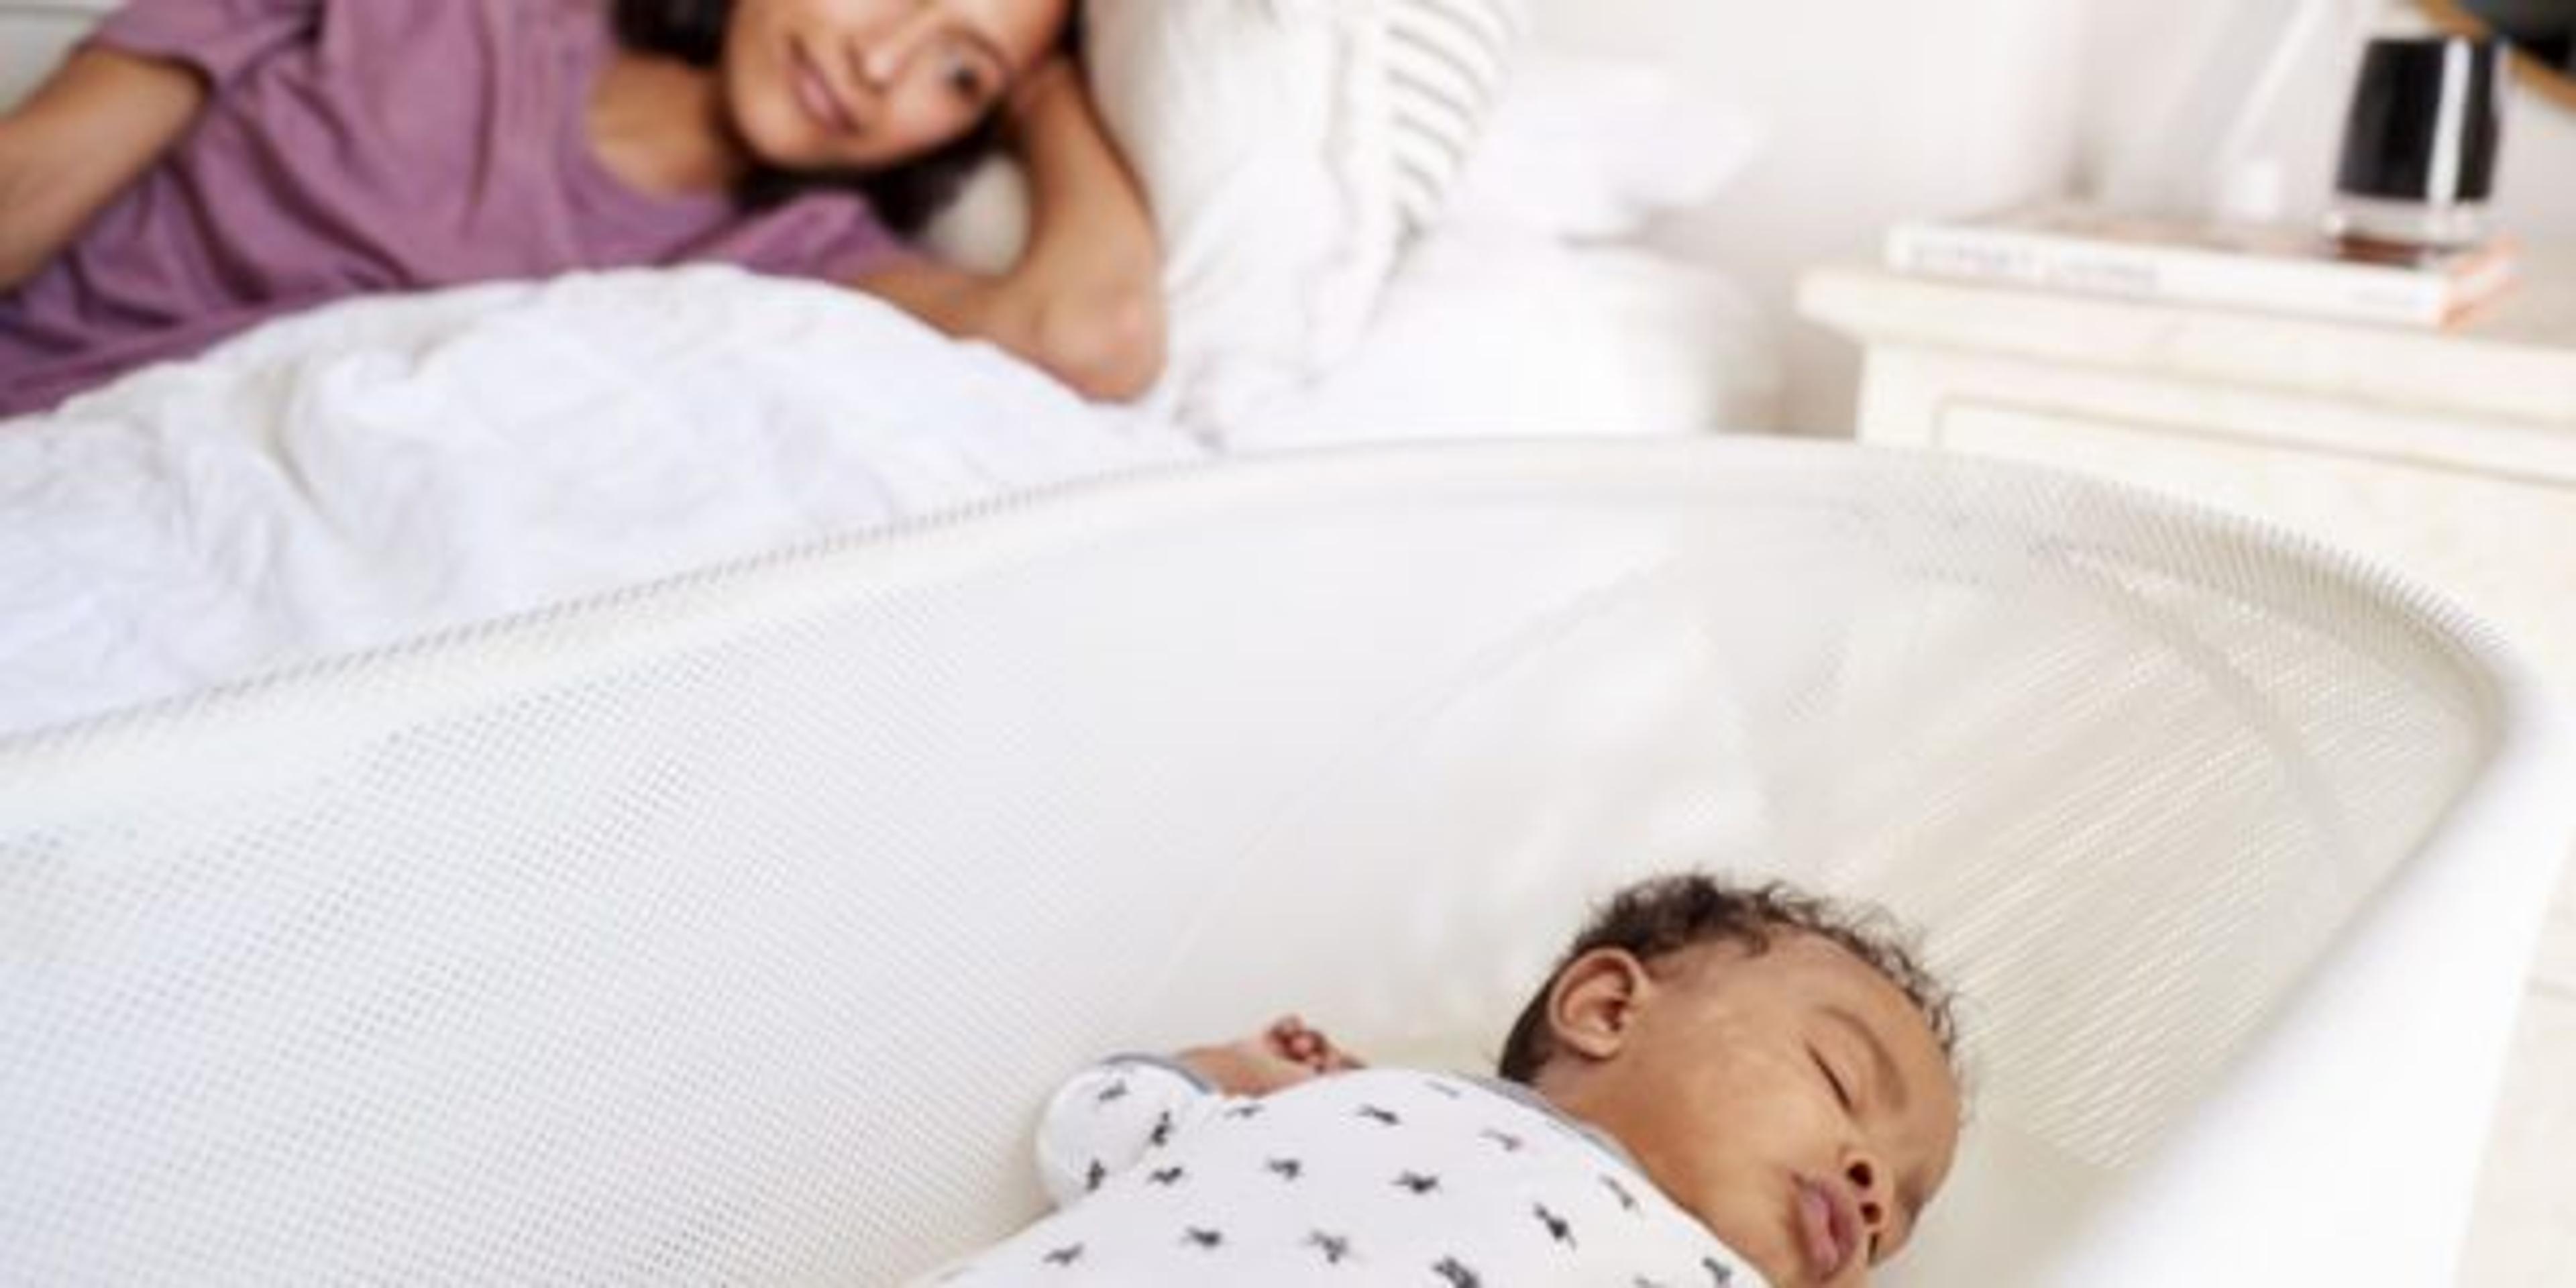 Young woman rests as her baby safely sleeps in her bassinet next to the bed